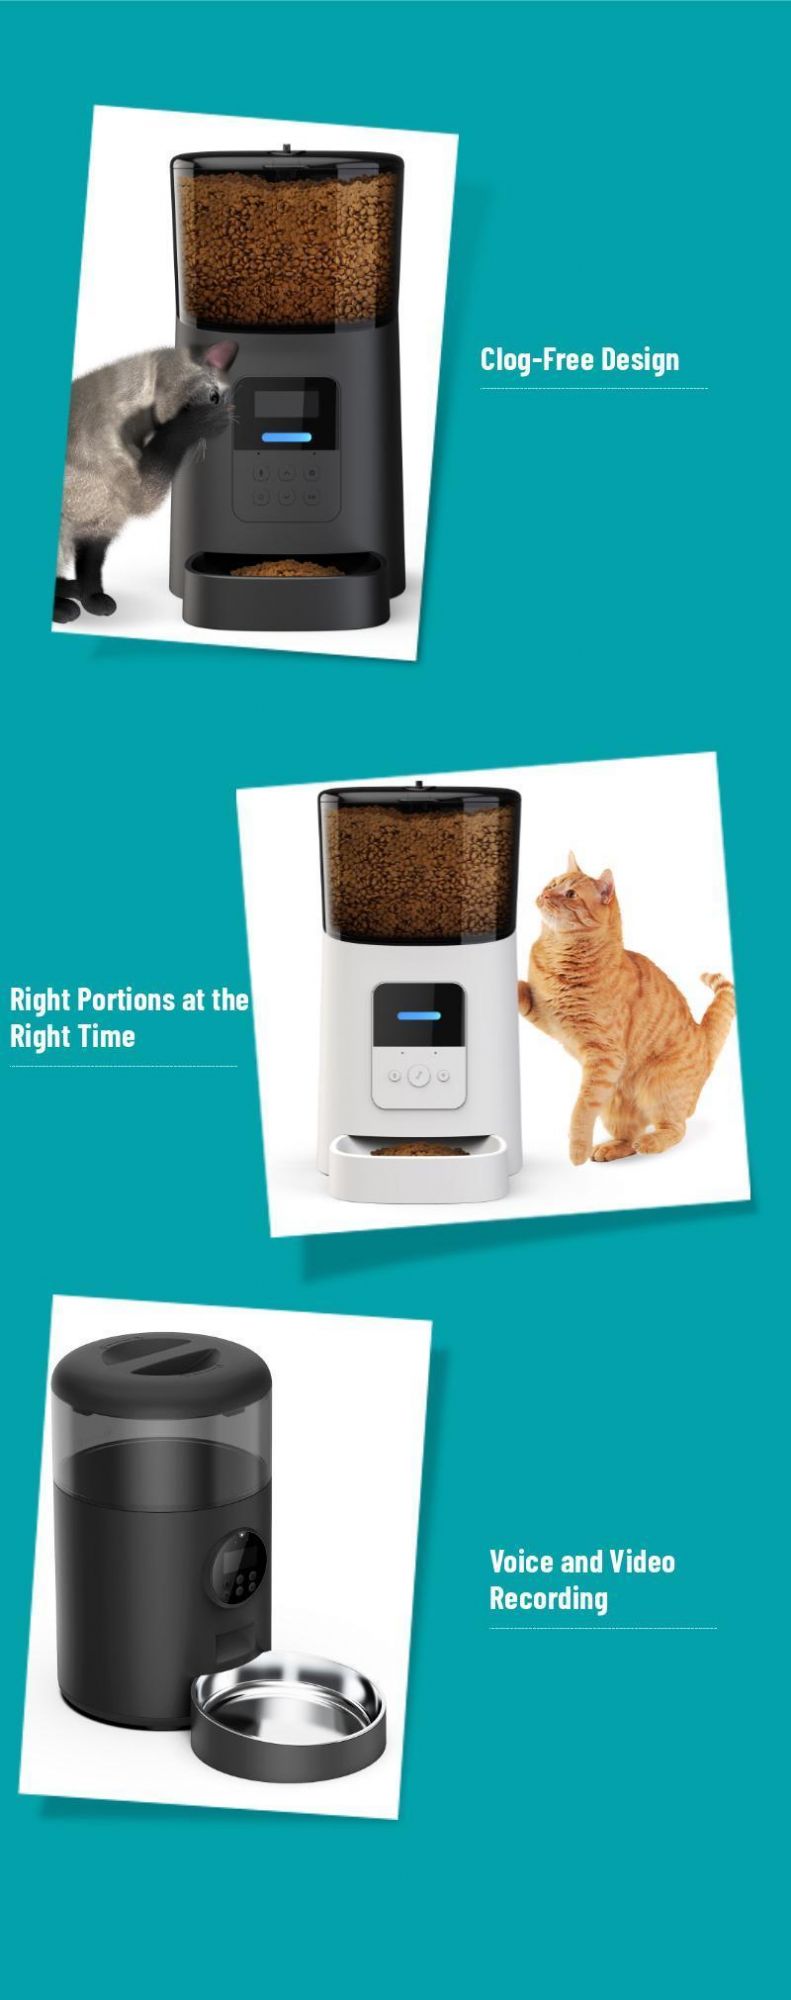 Dog Cat Smart Pet Feeder with Camera WiFi Remote Control